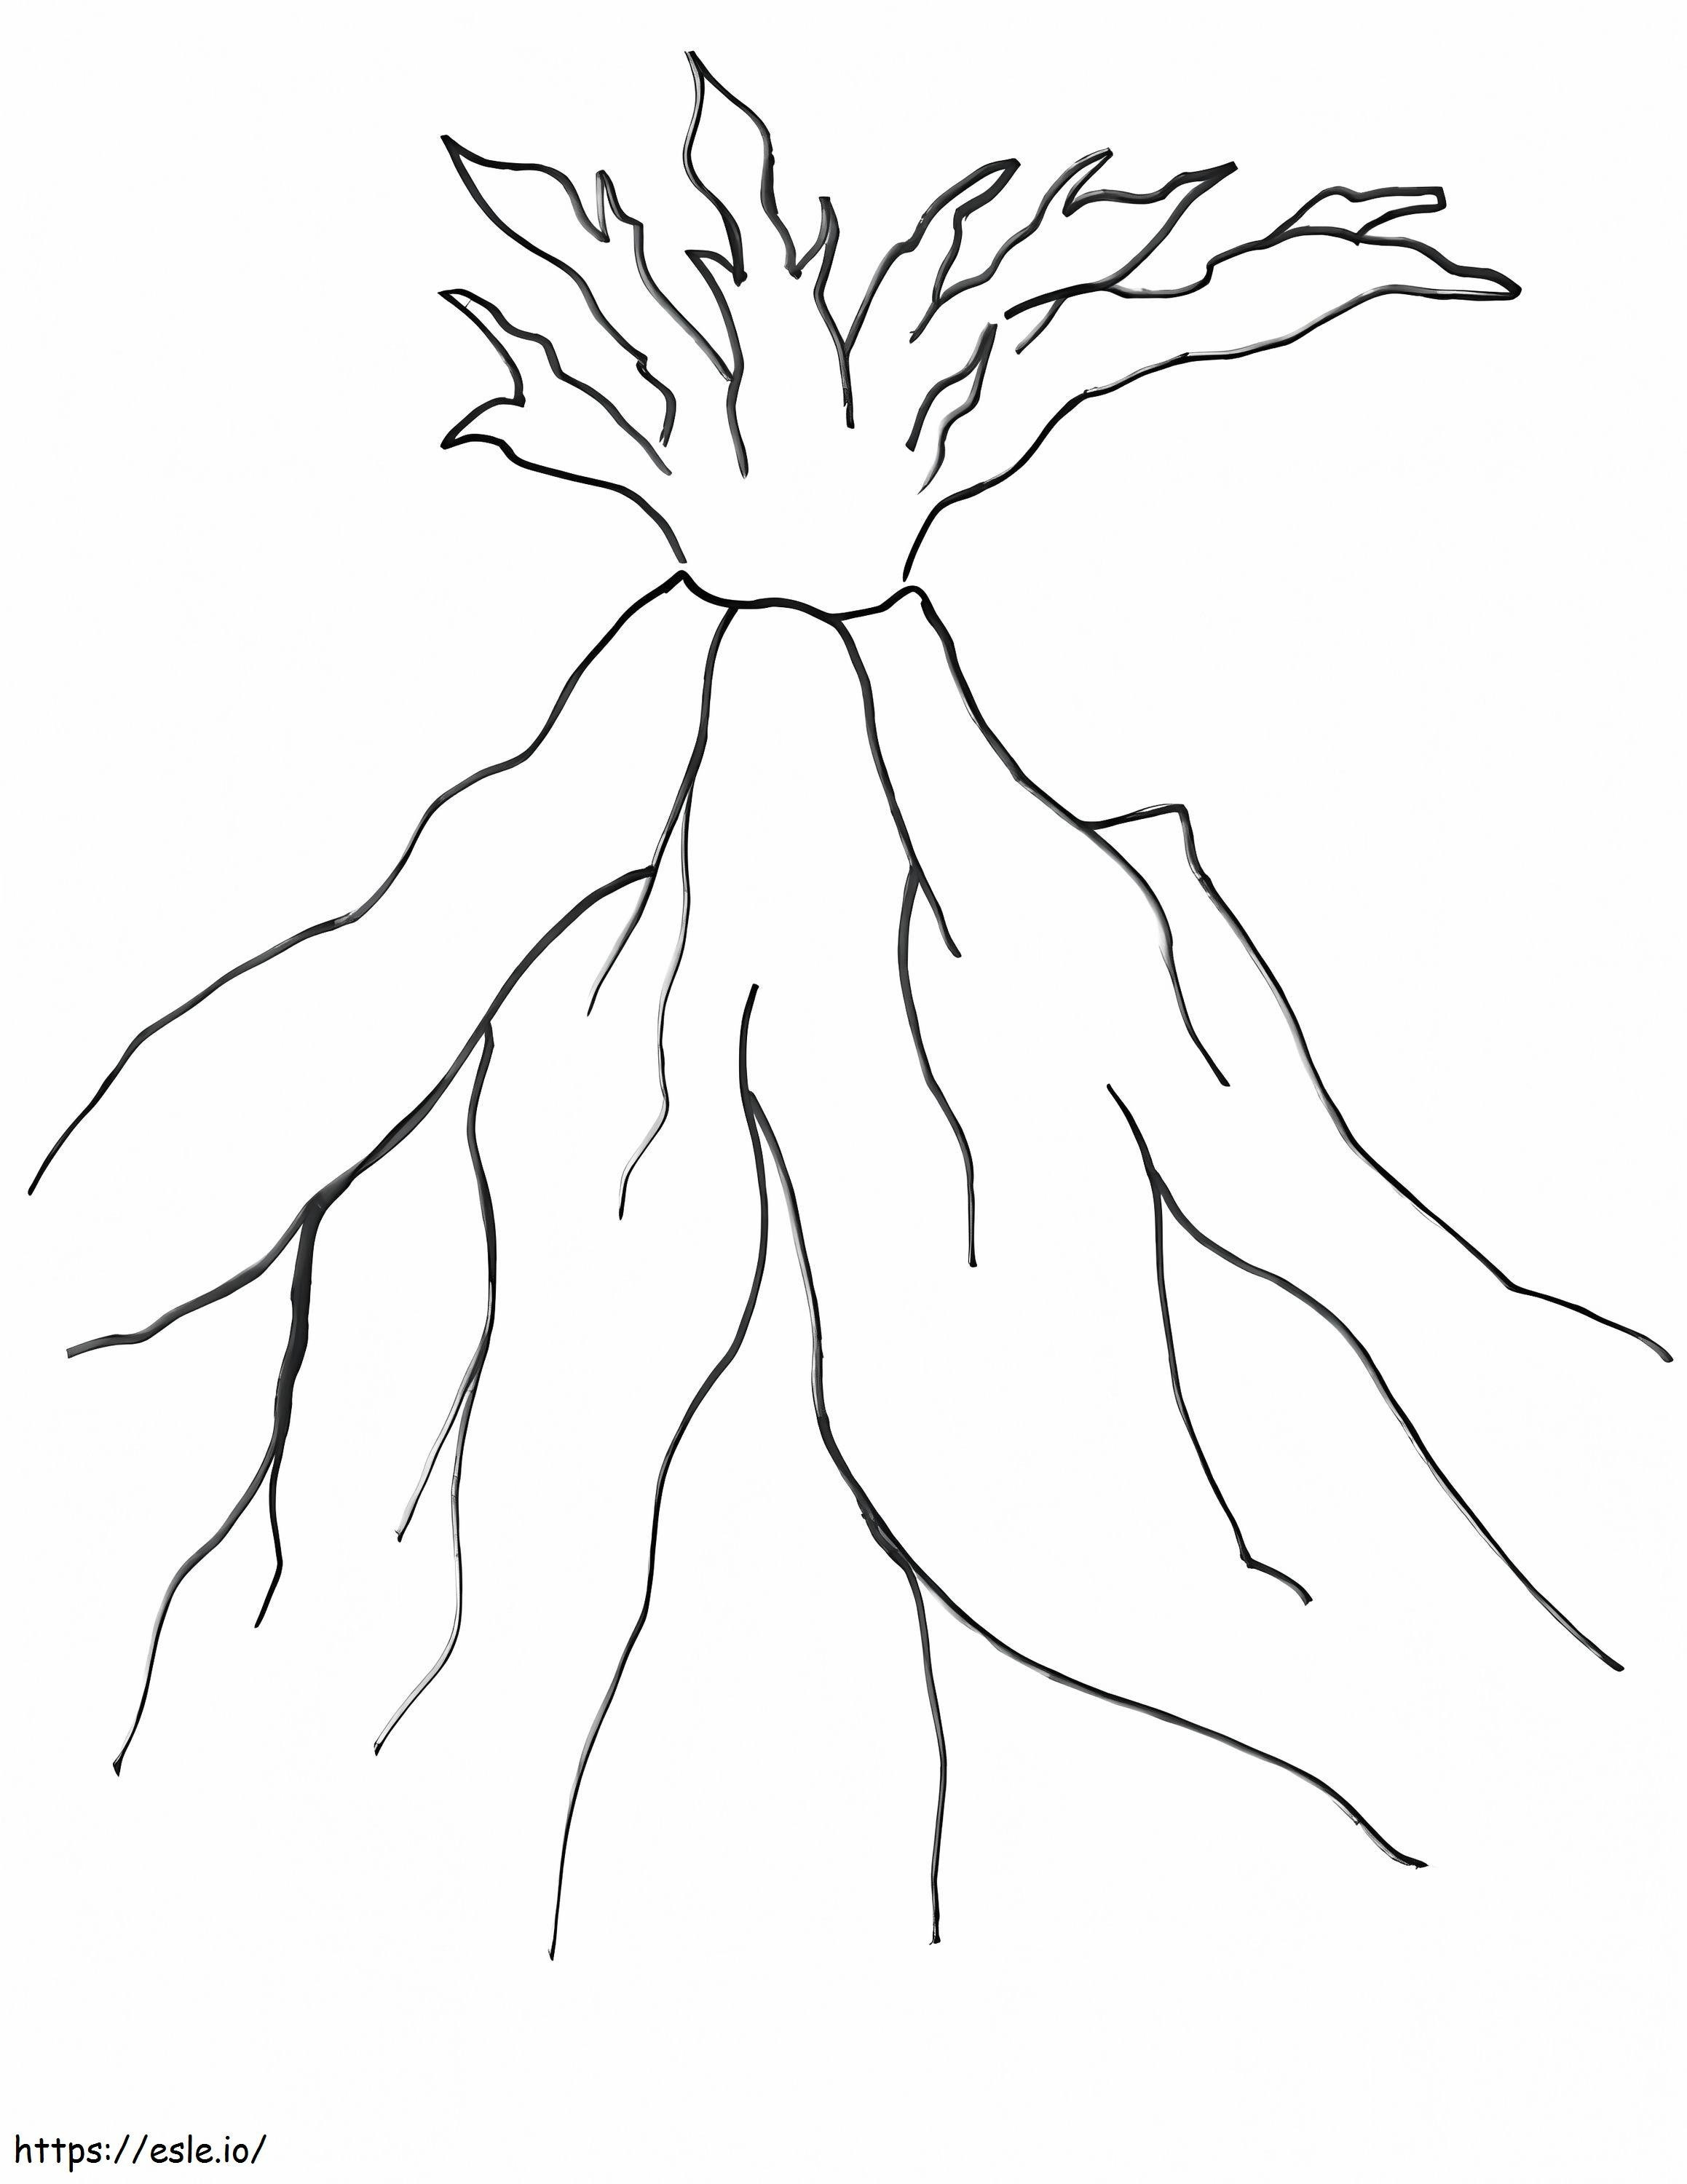 Volcano 1 coloring page